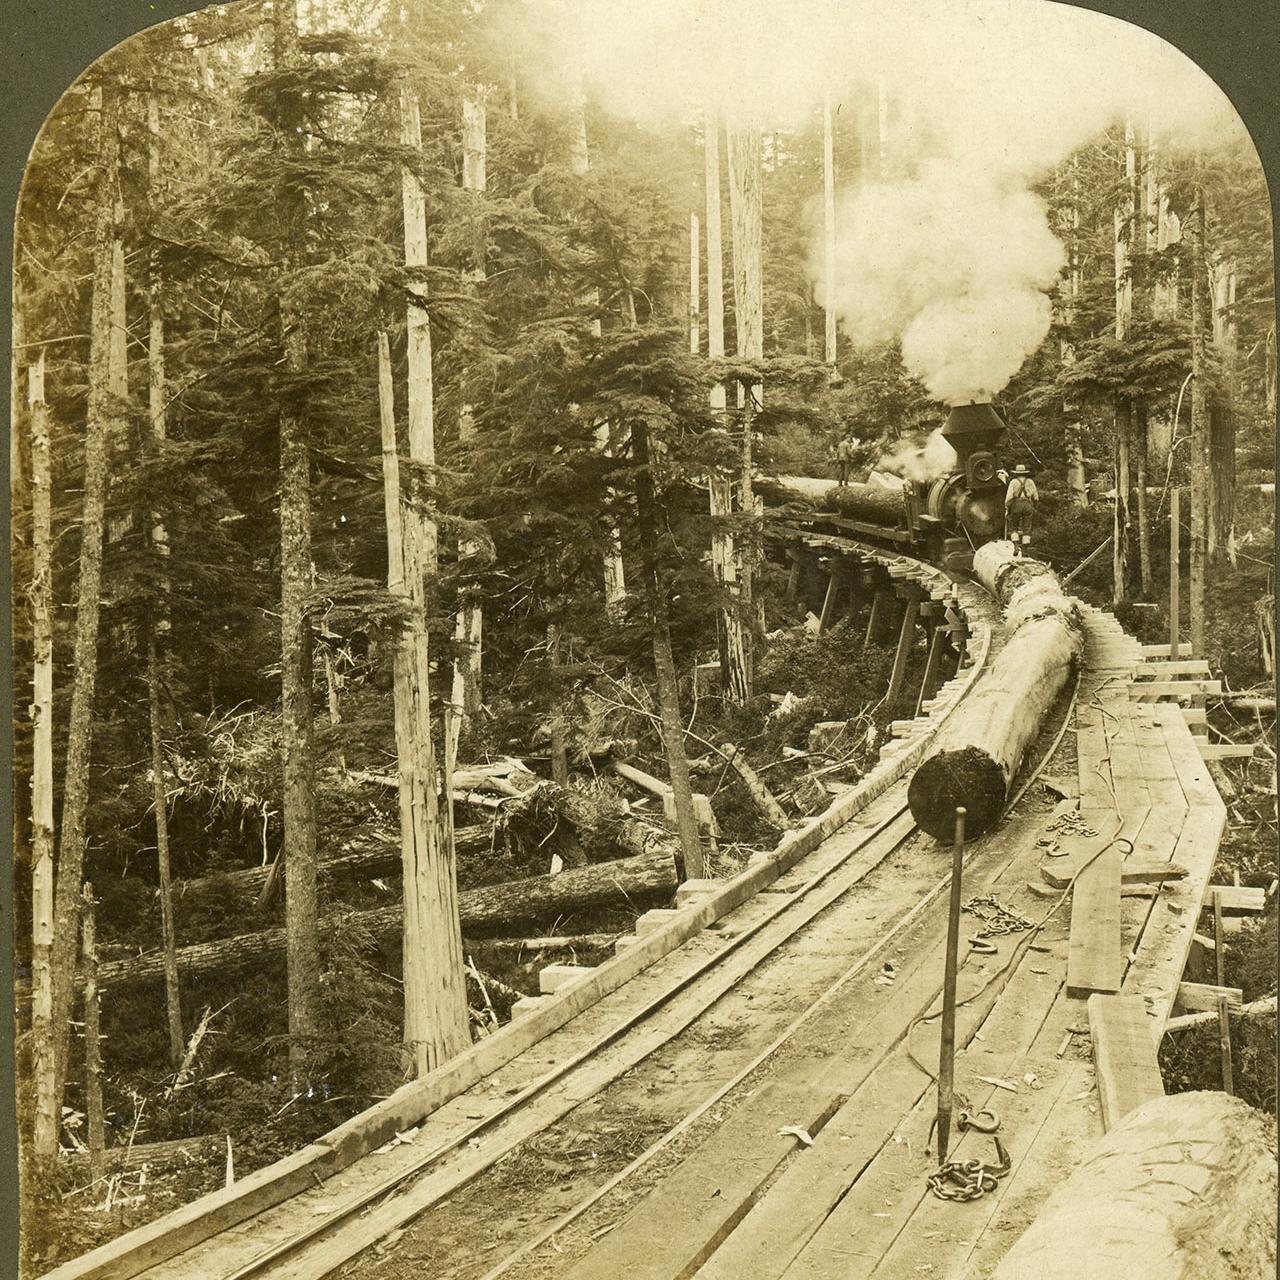 "Mountaineer" moving logs